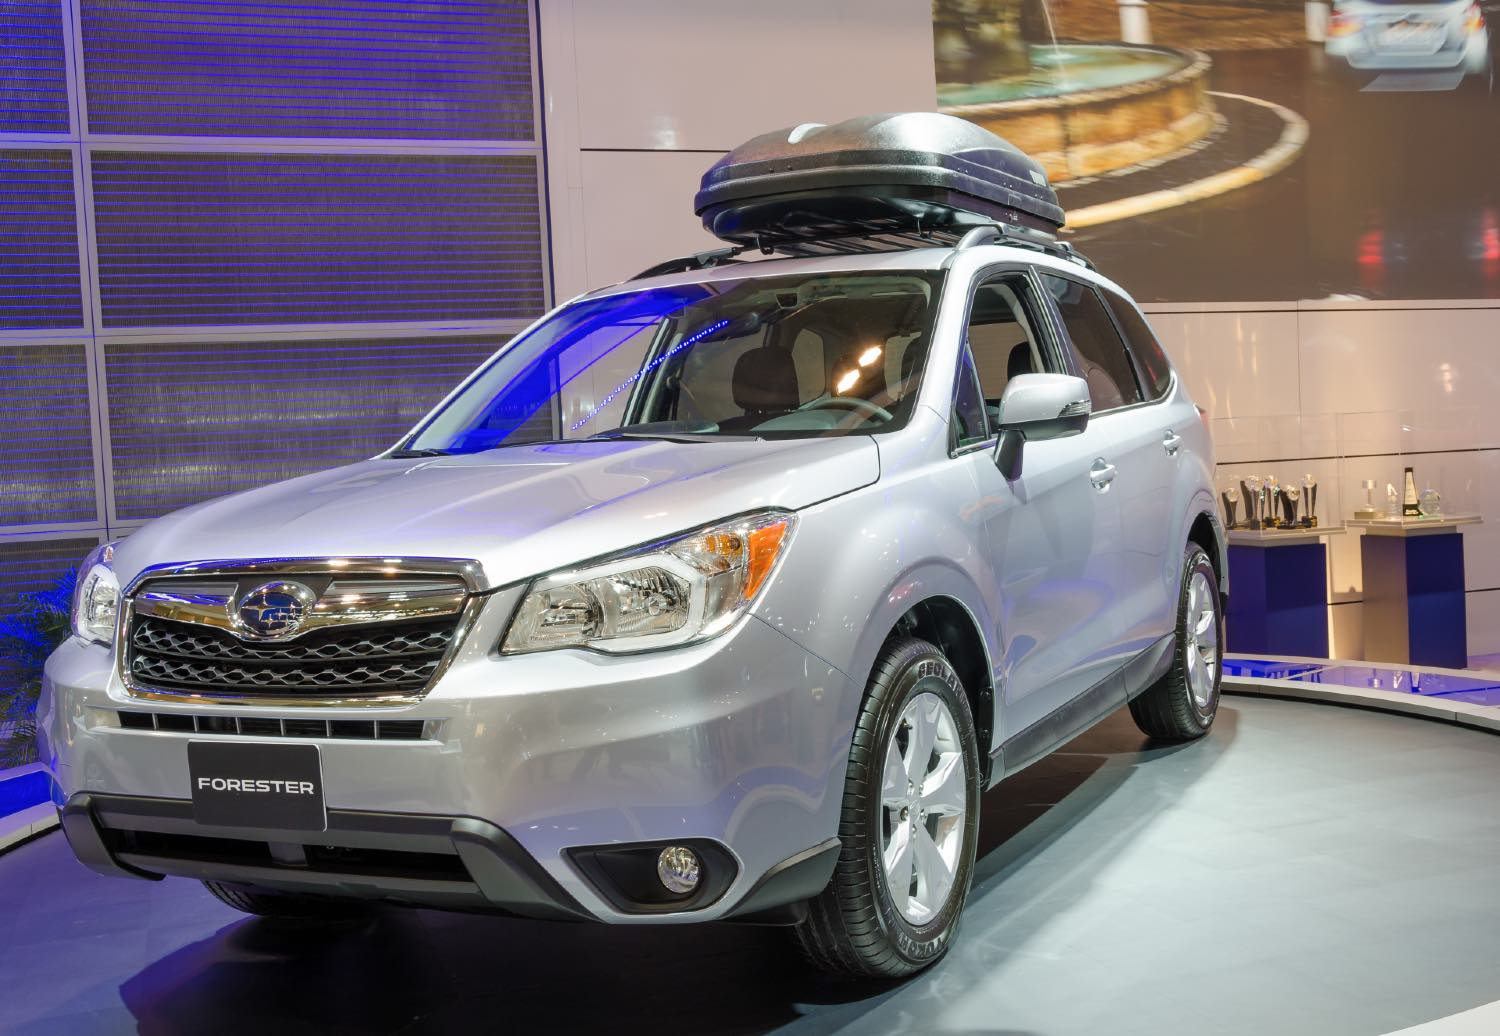 A 2014 Subaru Forester on display at an auto show. The 2014 Forester is one of the worst Subaru Forester models to buy used.